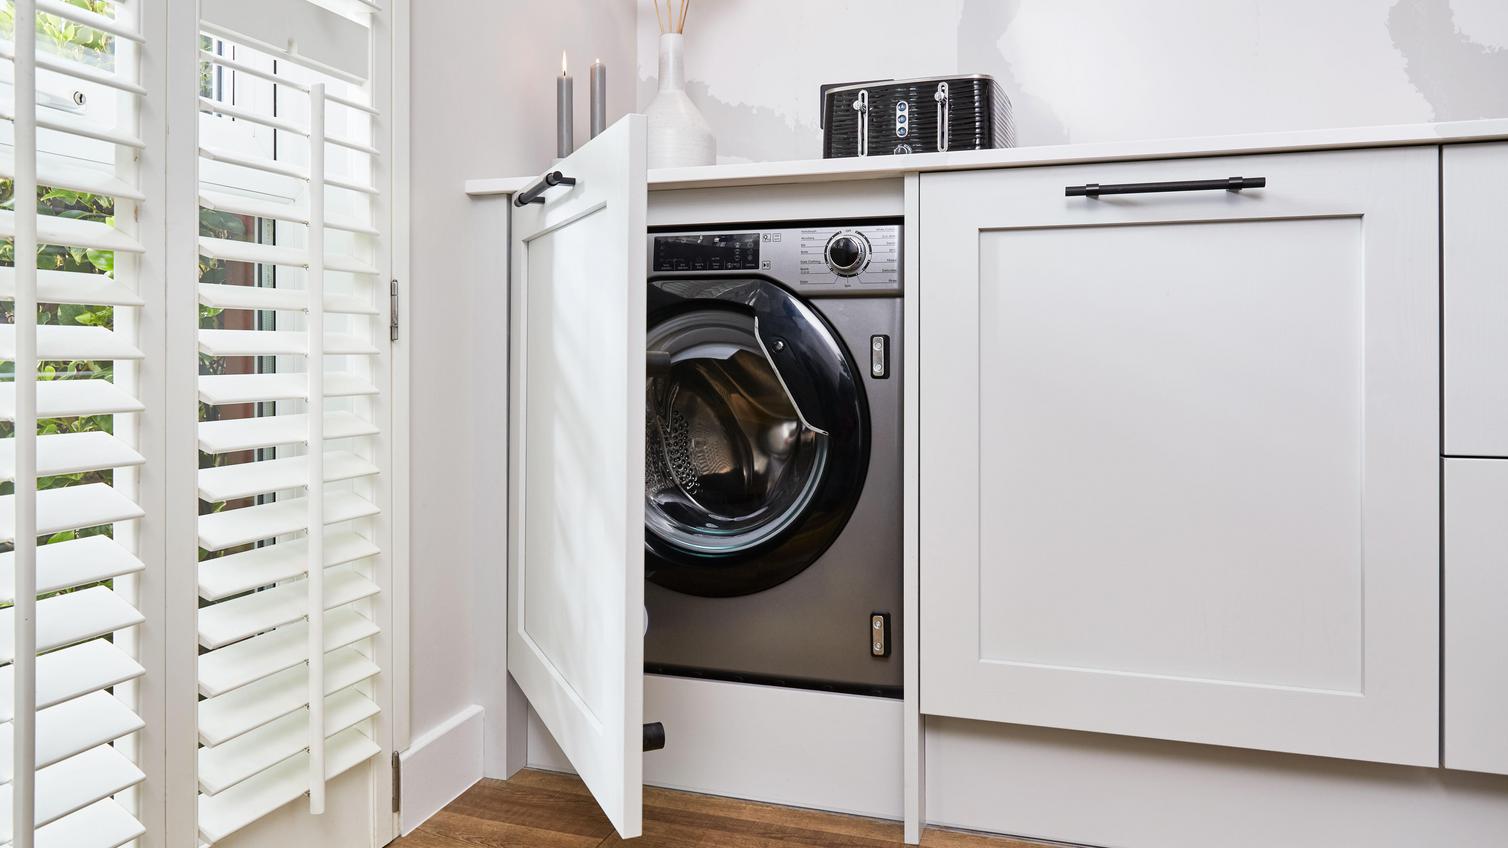 An integrated grey washing machine in a dove-grey, shaker kitchen with white, quartz worktops, black handles for wood floors.